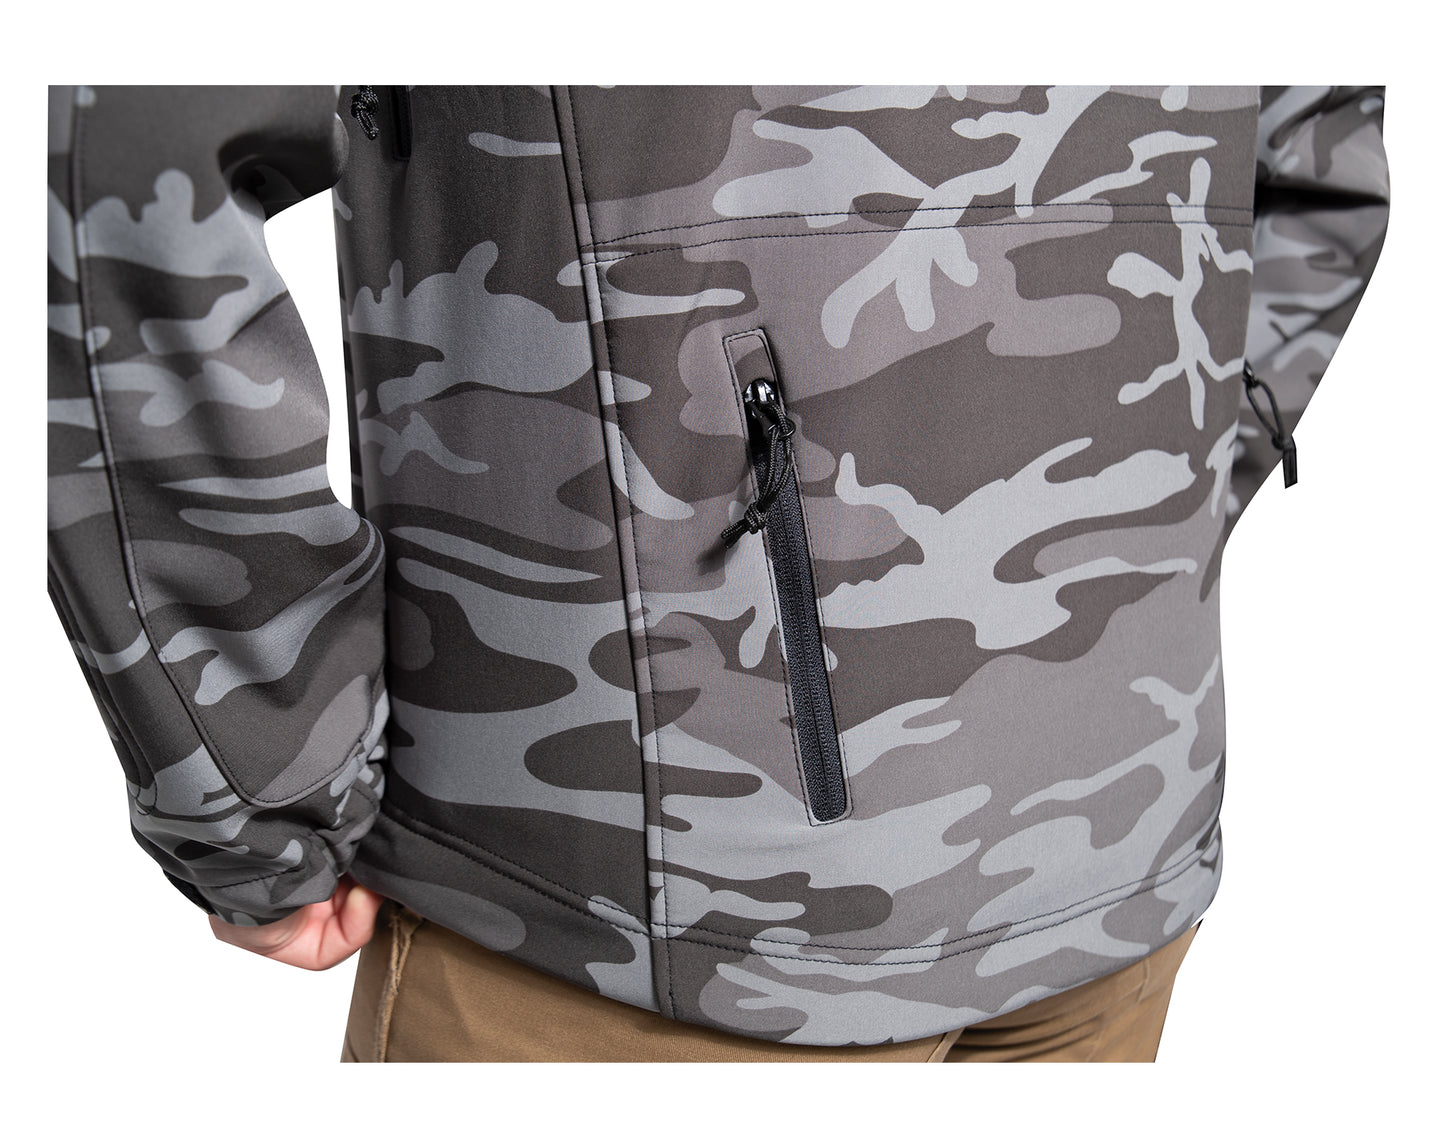 Rothco Special Ops Tactical Soft Shell Jacket - Black Camo